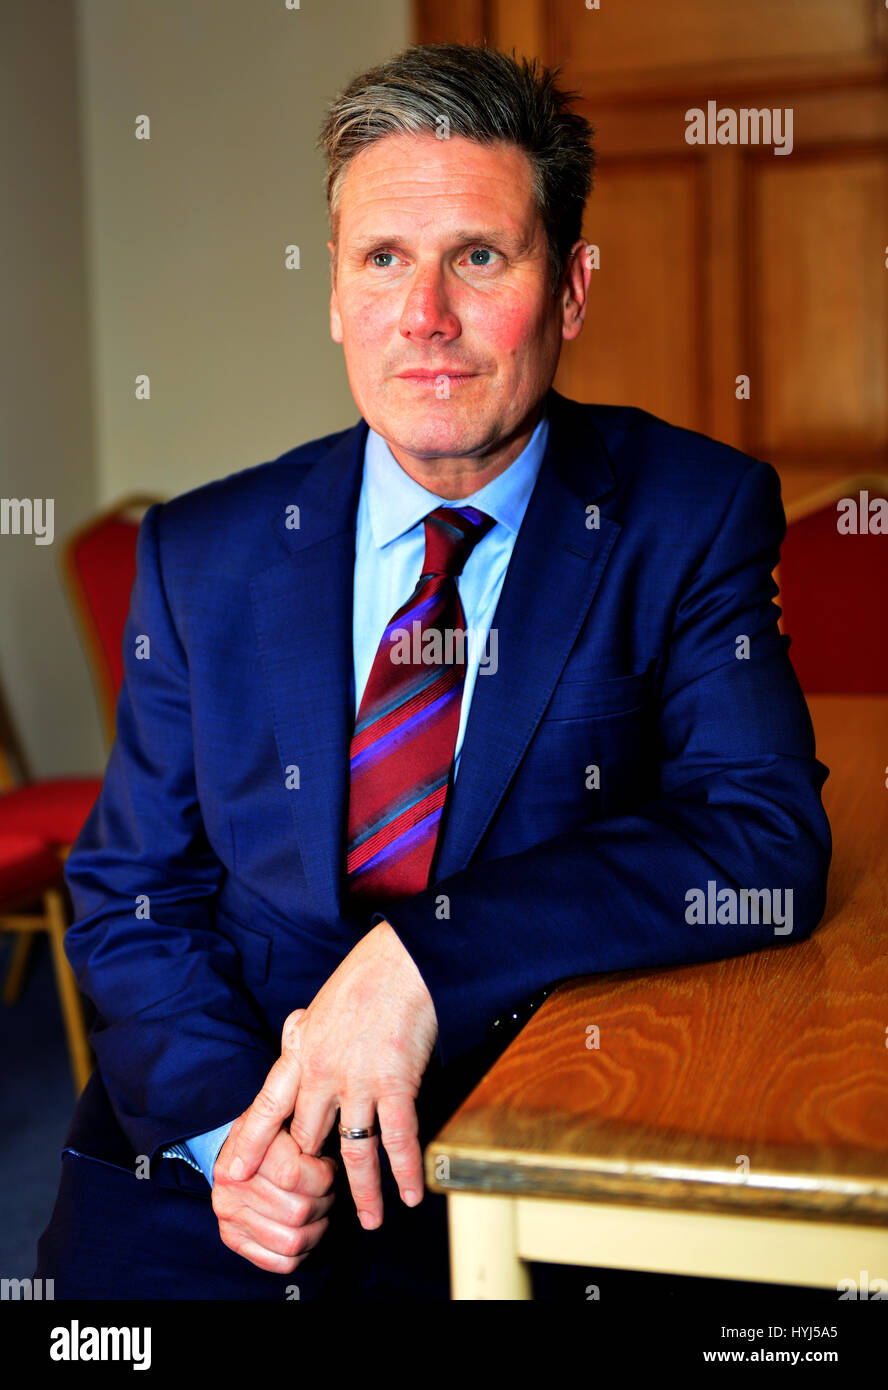 Gloucester, UK. 4th April, 2017. Gloucester England. Sir Keir Starmer m.p. Labour leader, launches, at The Guildhall Gloucester.. Credit: charlie bryan/Alamy Live News Stock Photo